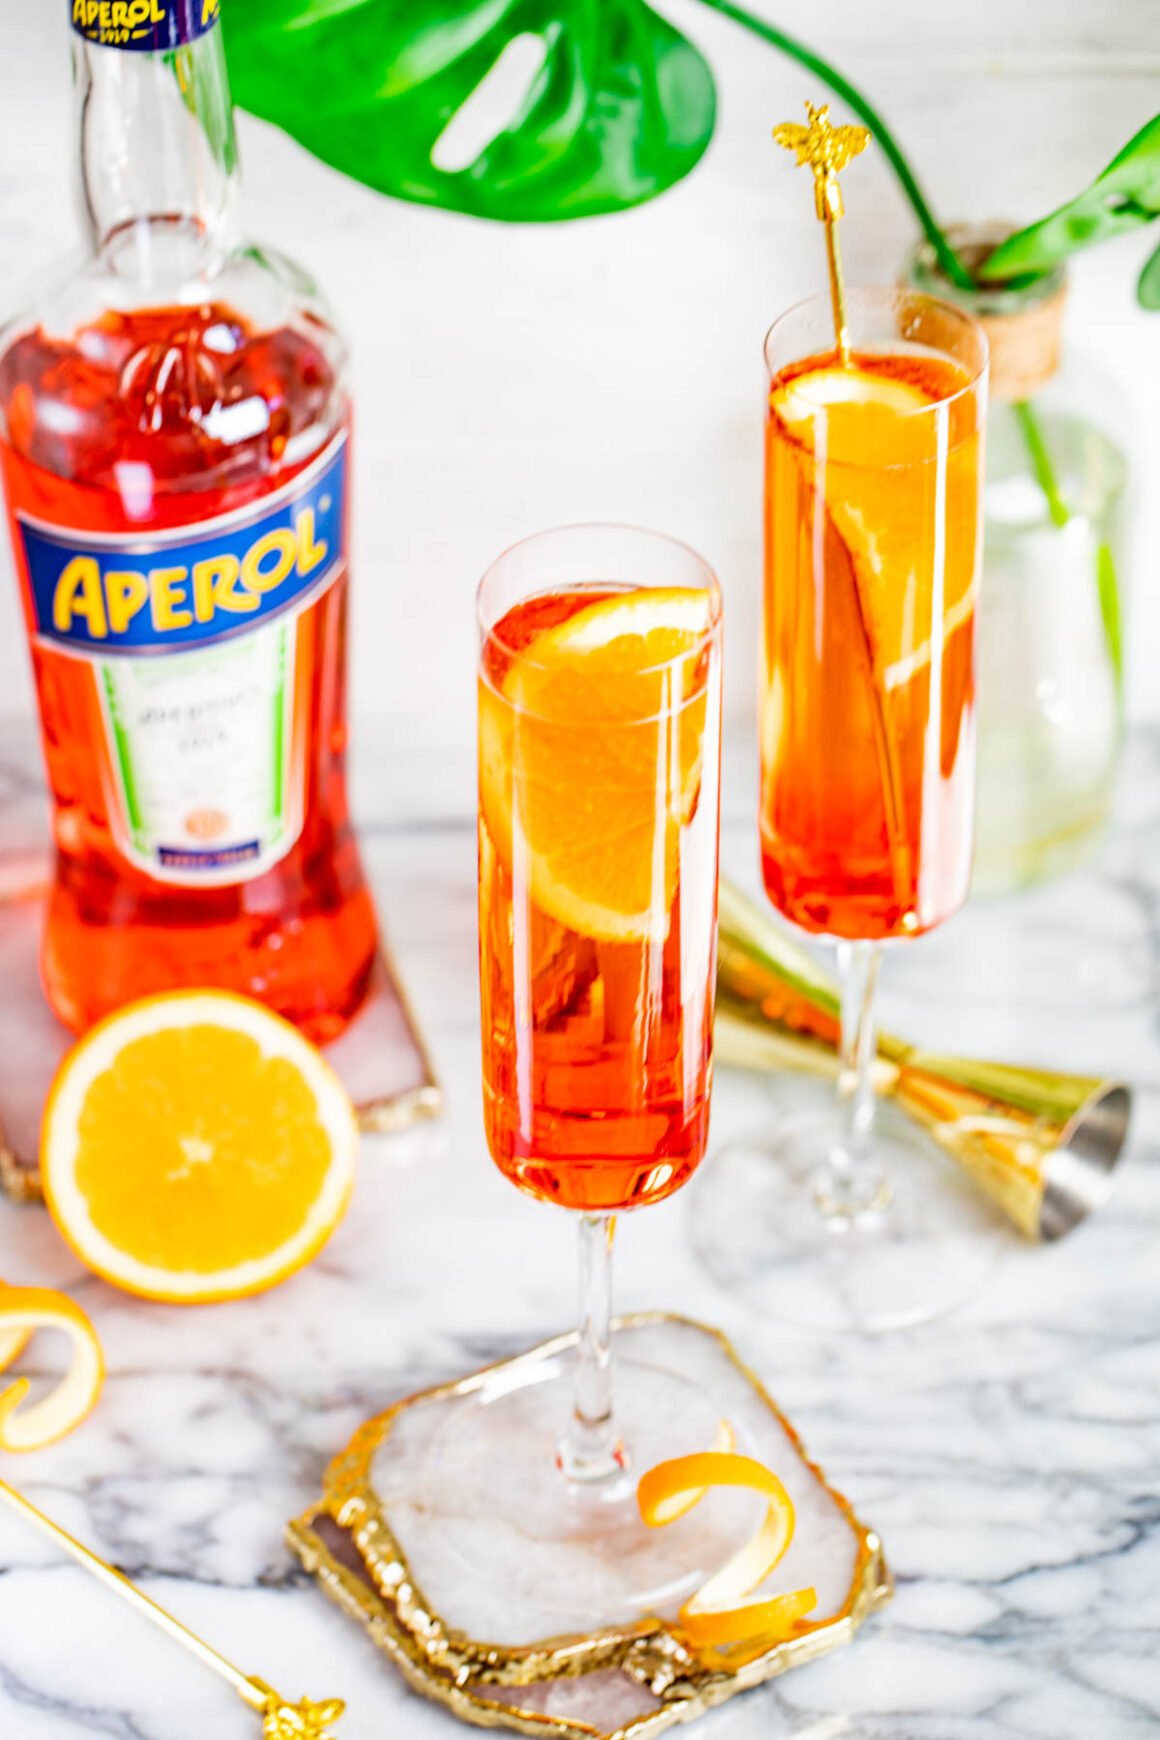 2 champagne glasses with limoncello cocktails and a red bottle of aperol liqueur